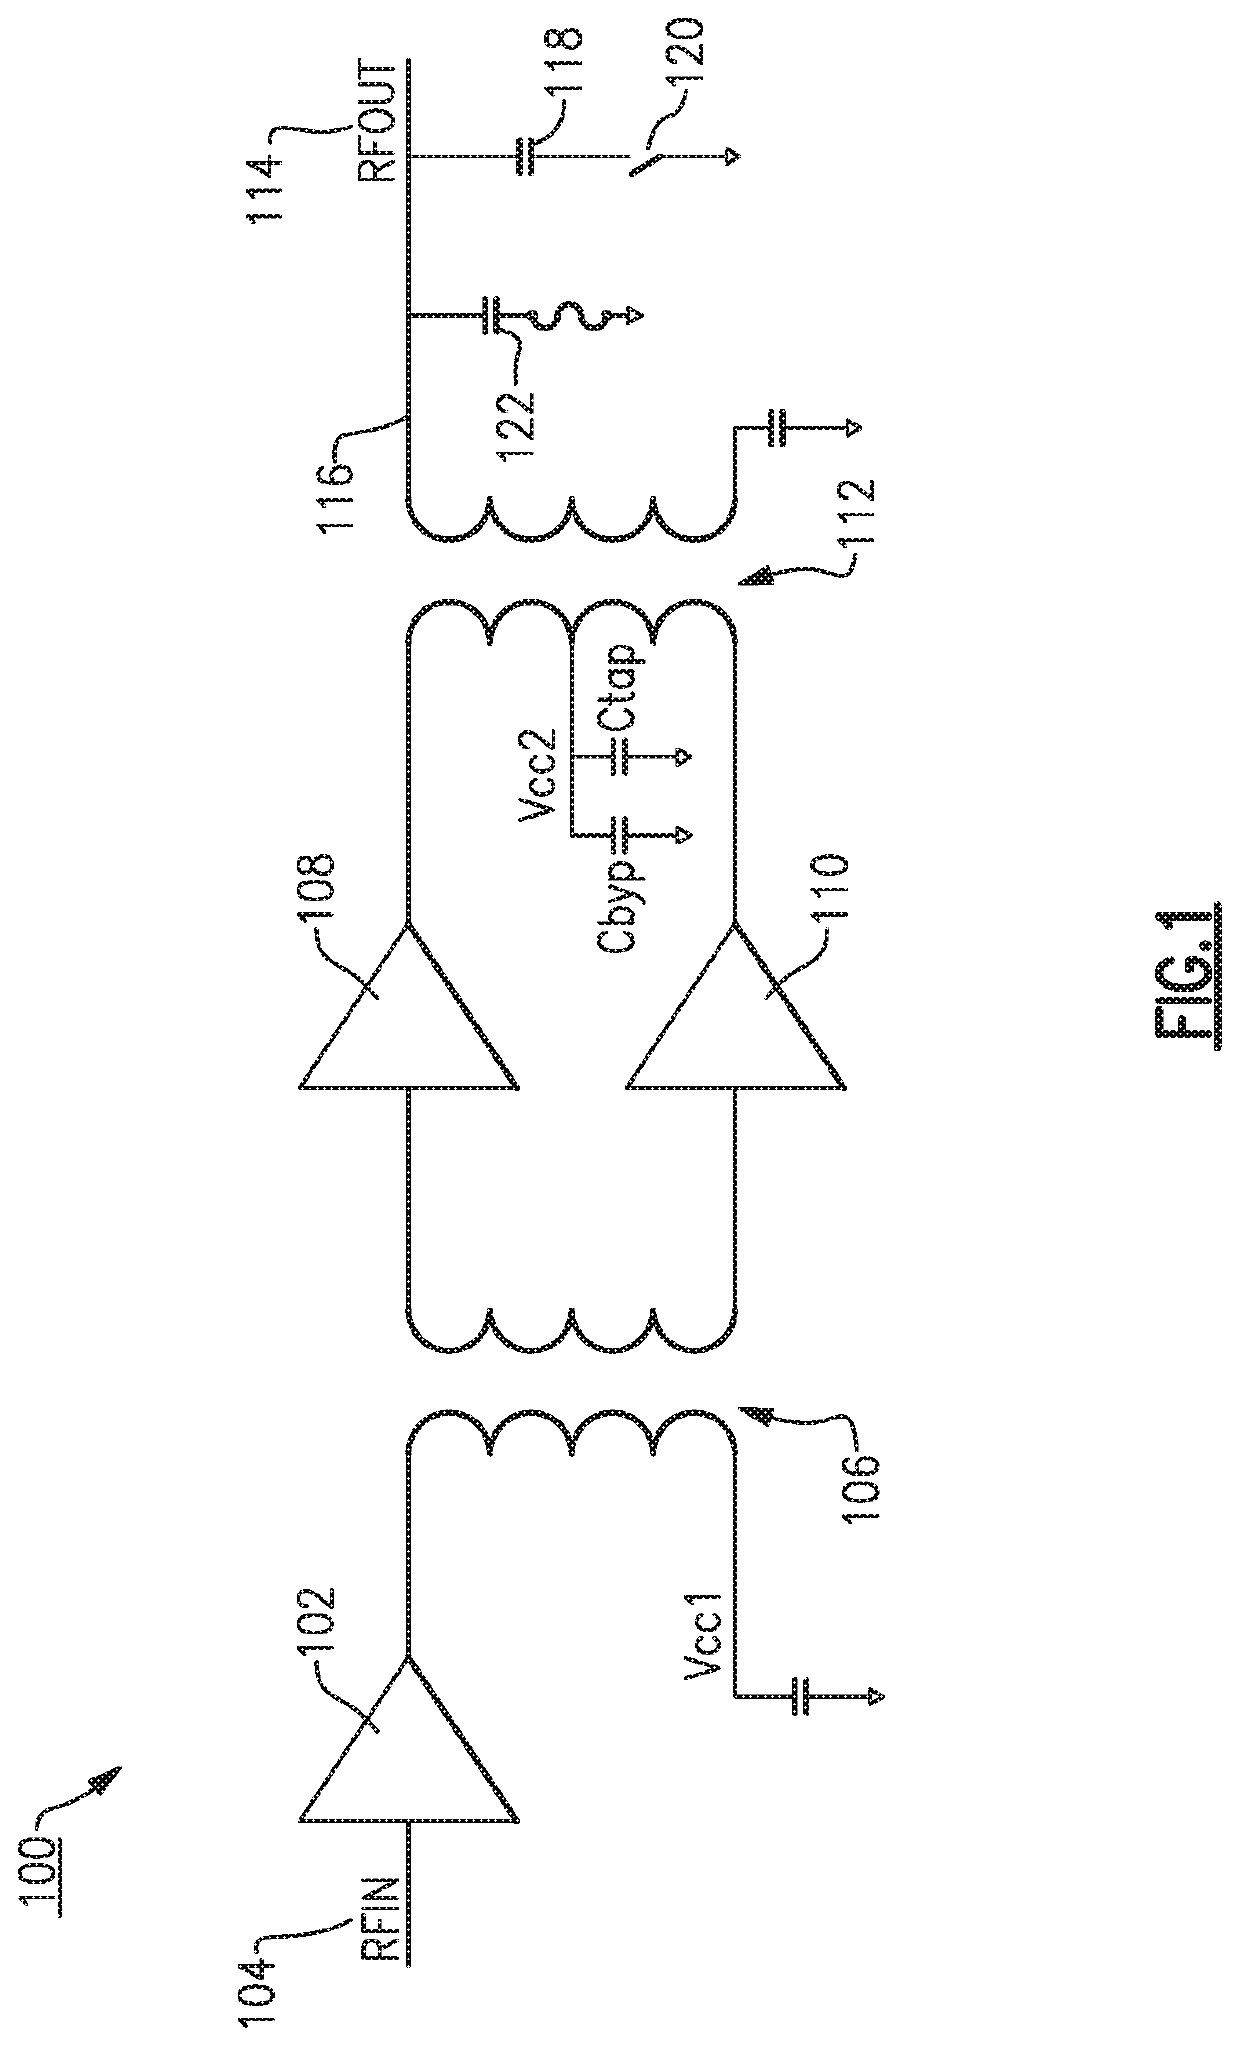 Load-line switching for push-pull power amplifiers